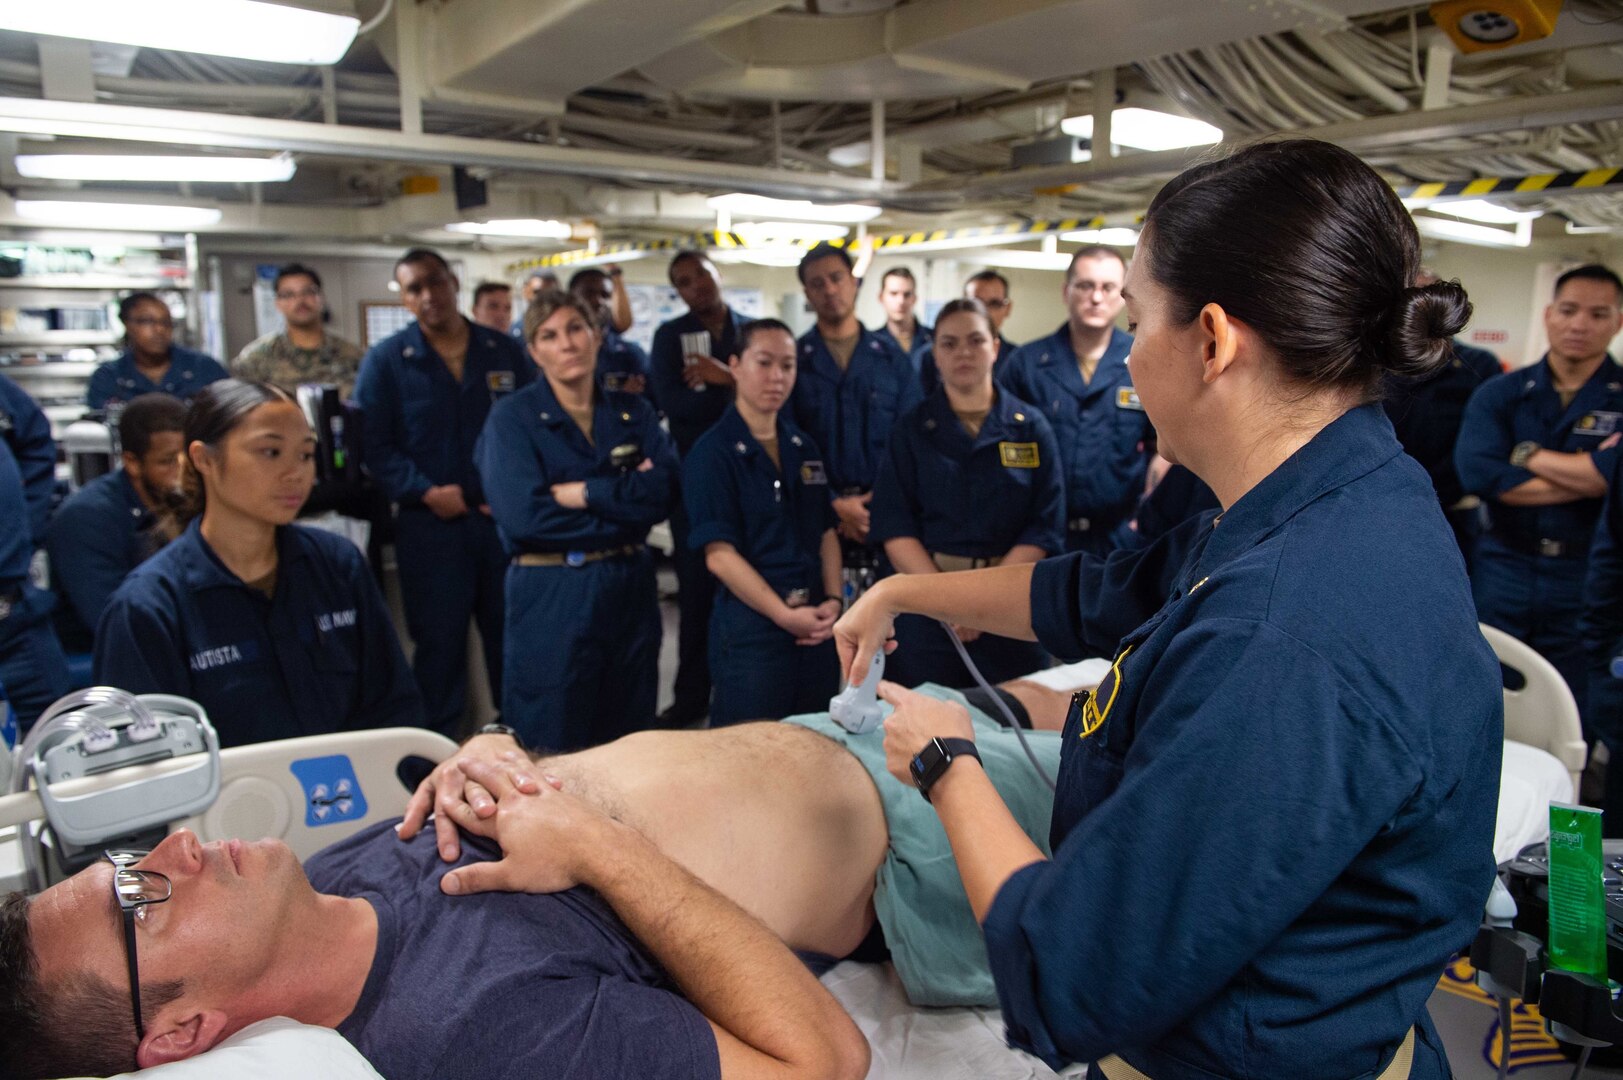 Lt. Cmdr, Stacy Coulthard, a surgeon assigned to Fleet Surgical Team (FST) 2, conducts ultrasound training to practice assessing traumatic injuries aboard the San Antonio-class amphibious transport dock ship USS Arlington (LPD 24), Aug. 20, 2021.